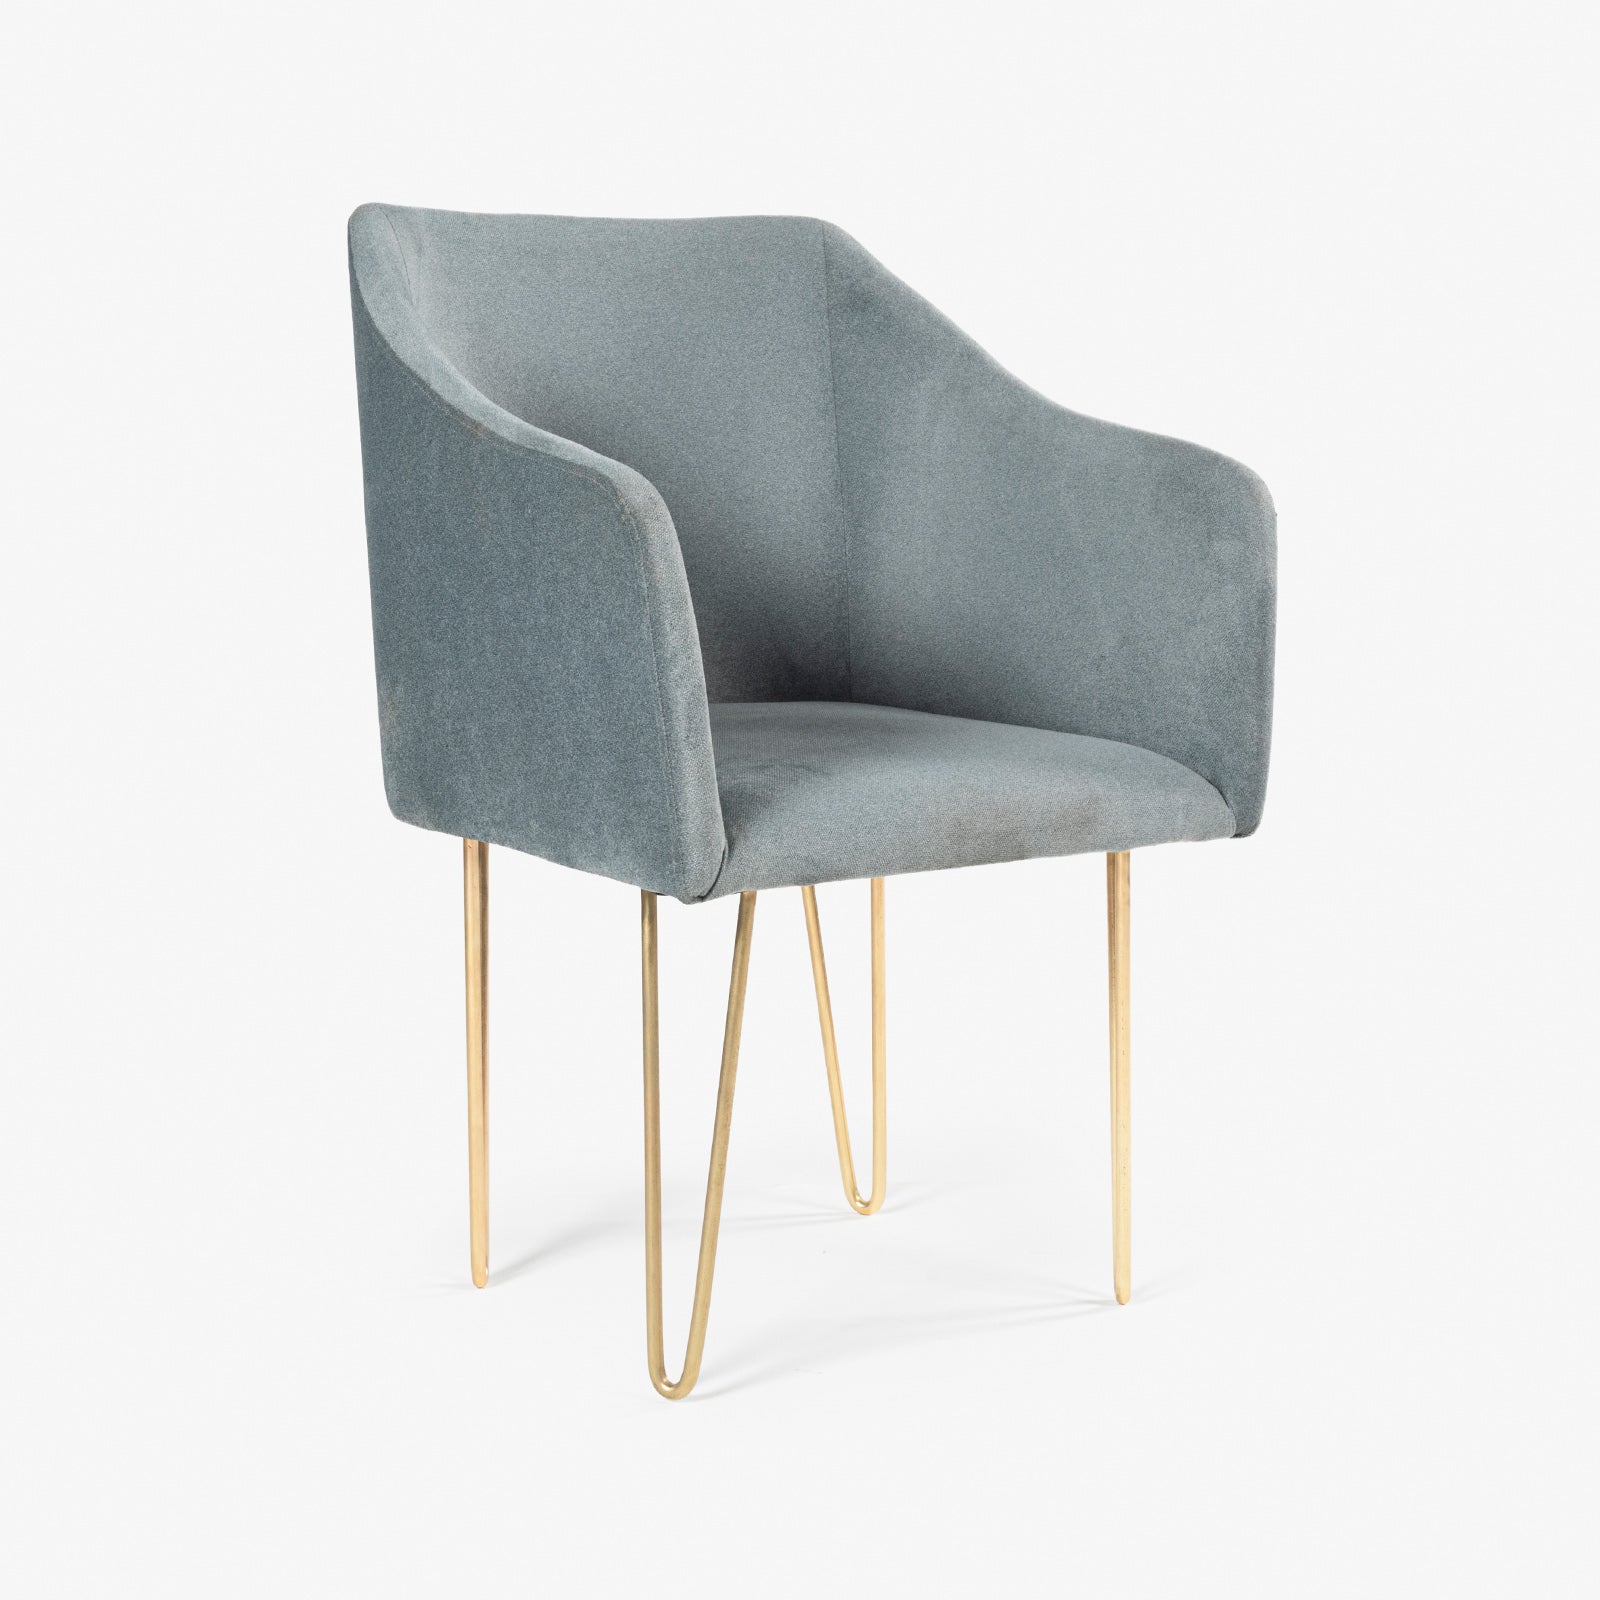 Barcelona Chair With Arms